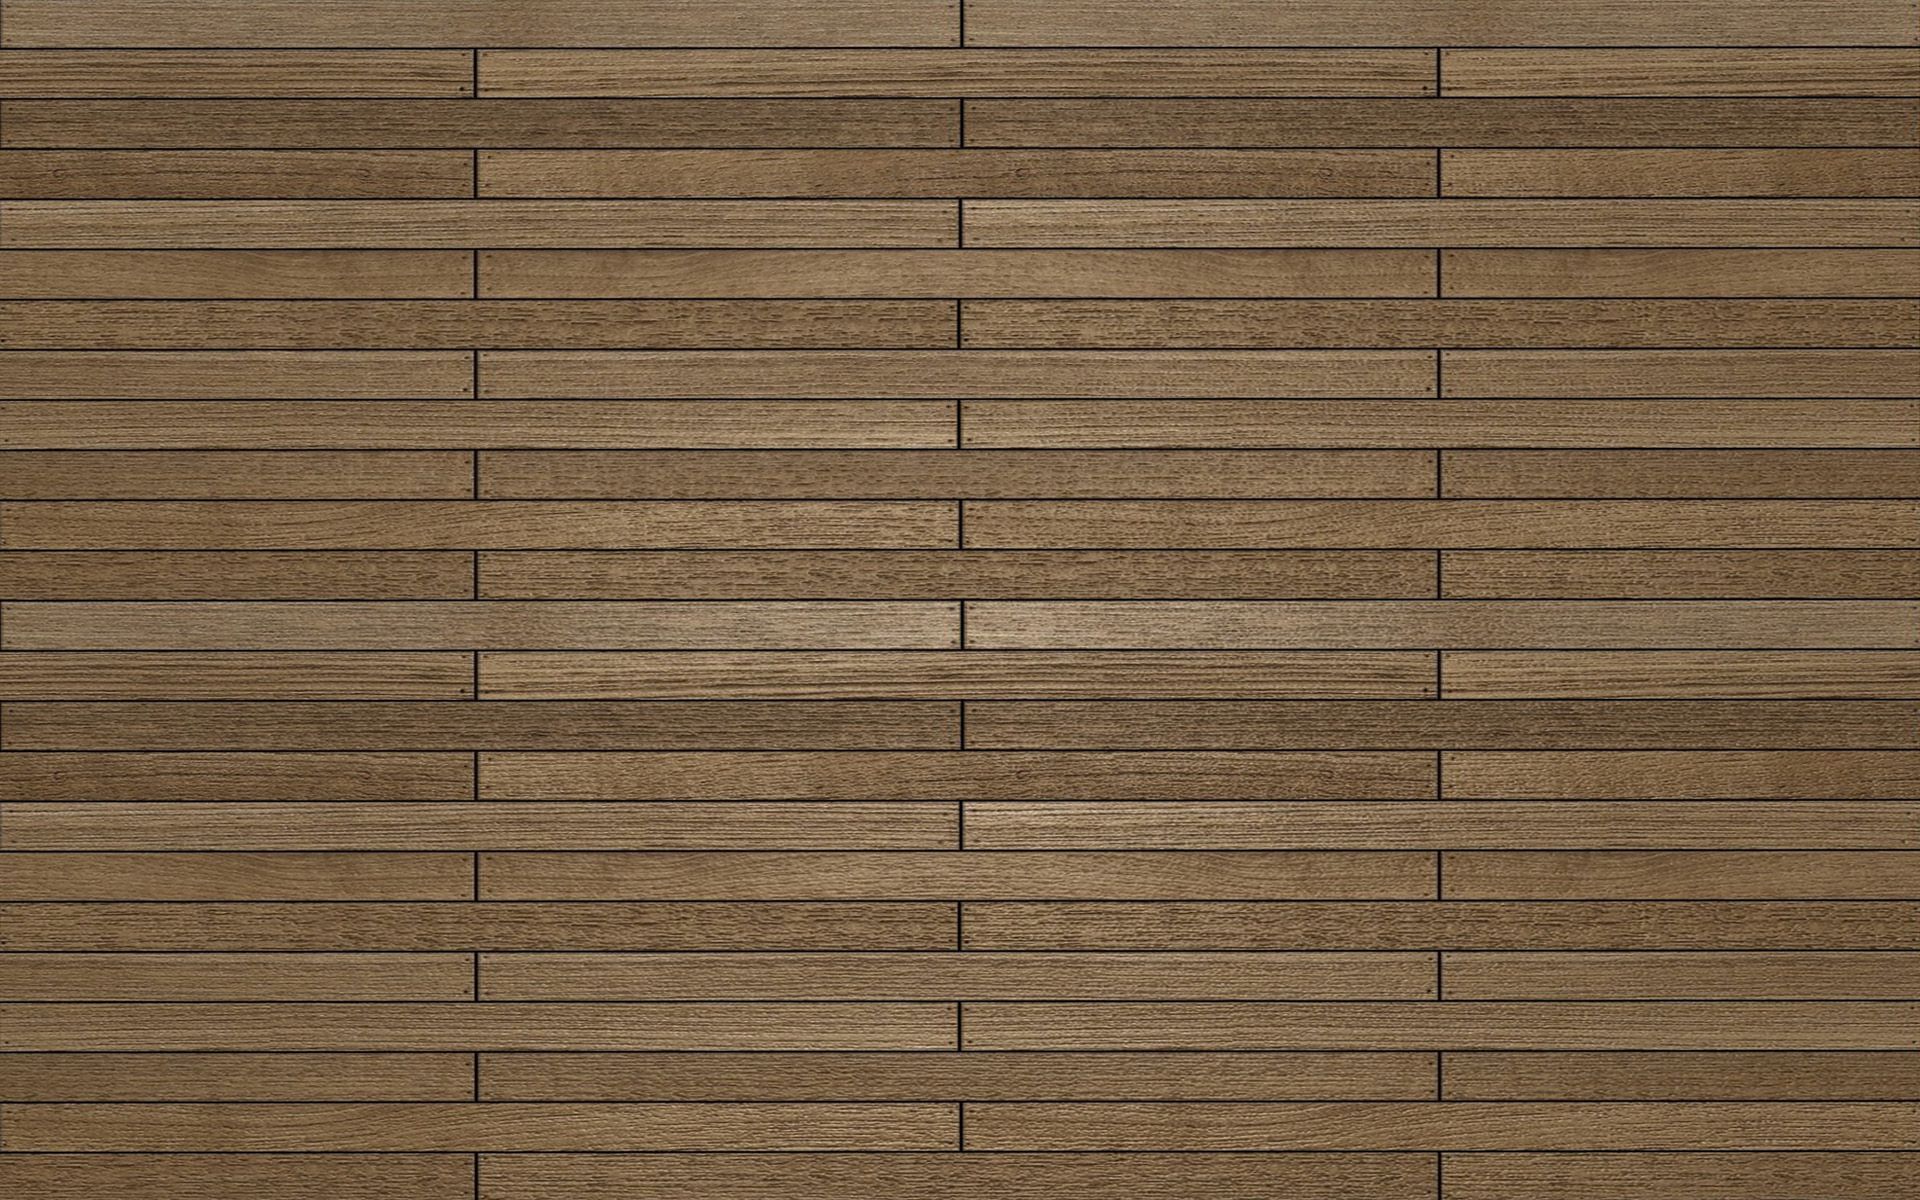 Free download Wood floor background wallpaper Others 1920x1200